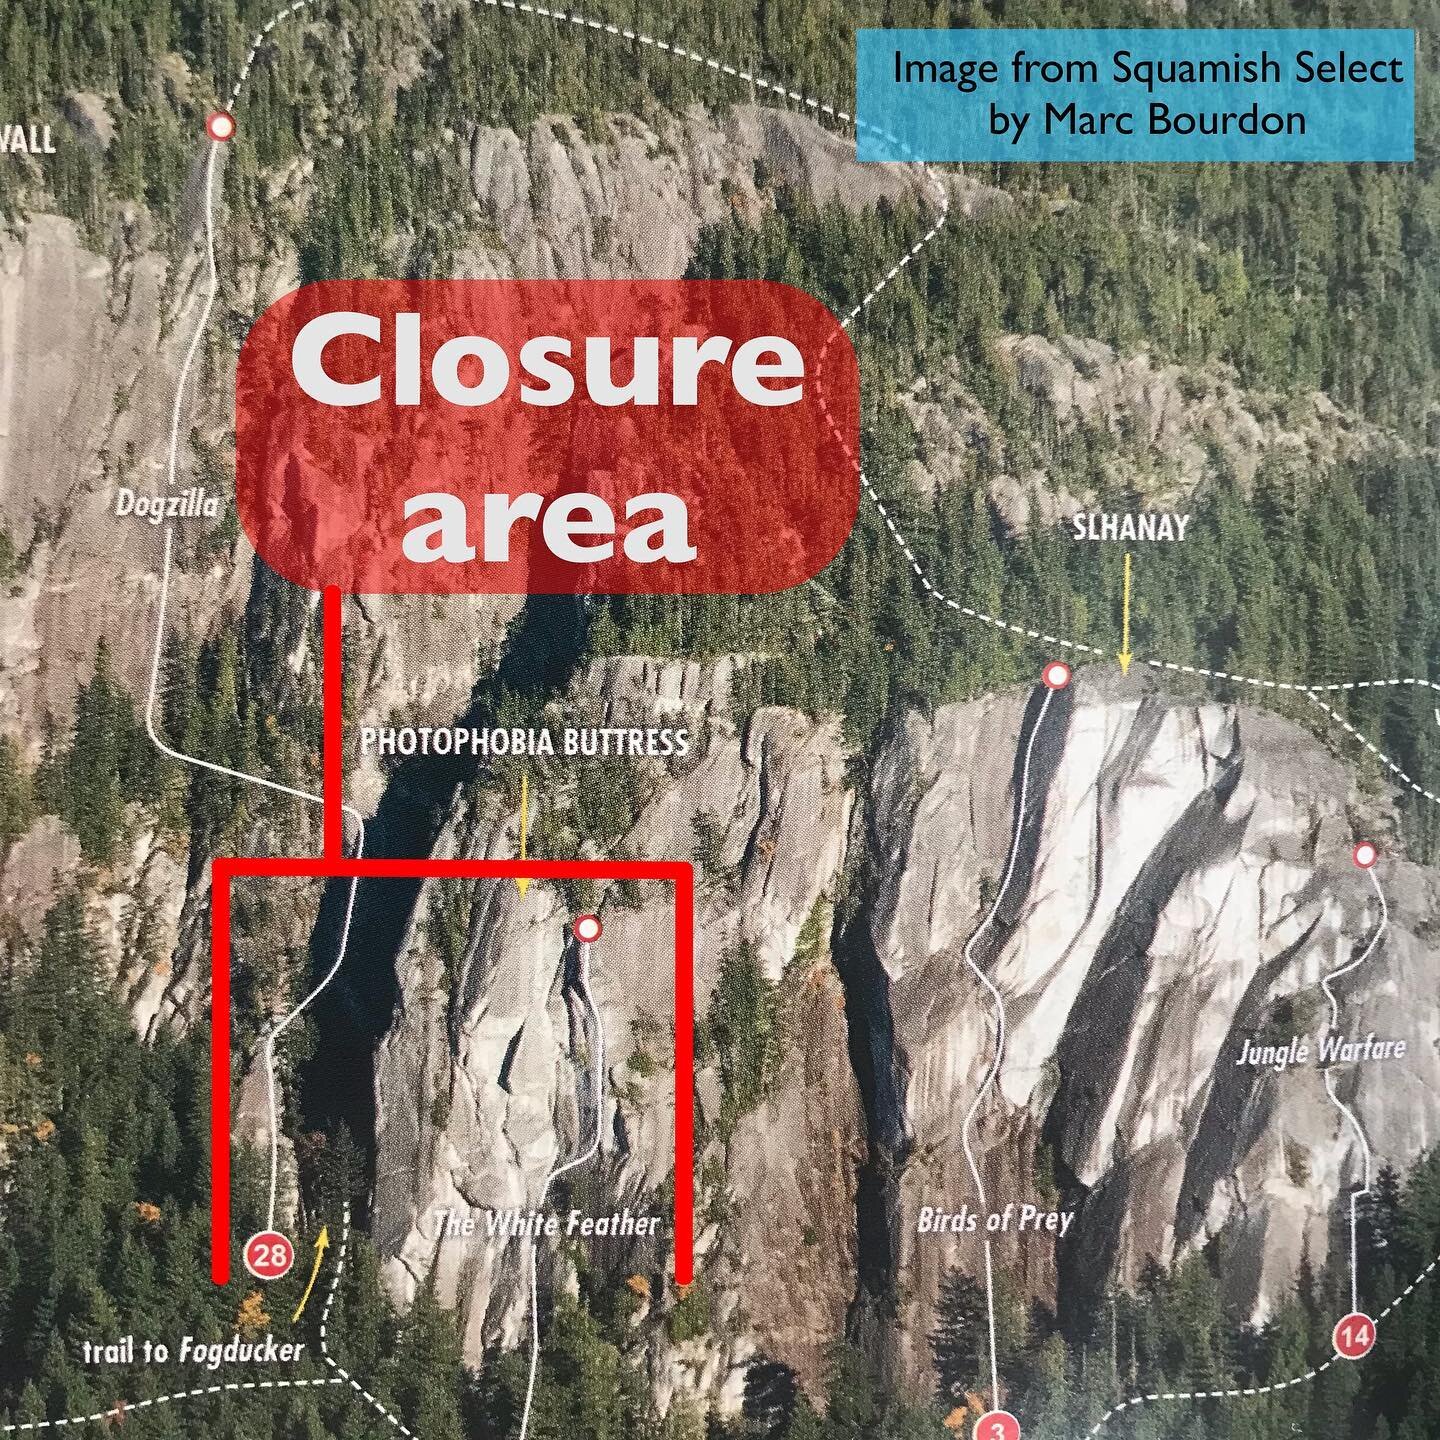 Slhanay closure:
After rockfall earlier this week on the Photophobia buttress, BC parks has temporarily closed some of the climbs on Slhanay. The area affected runs left to right from Dogzilla(5.11b) to The White Feather(5.11d)/The Dean Channel(5.11b